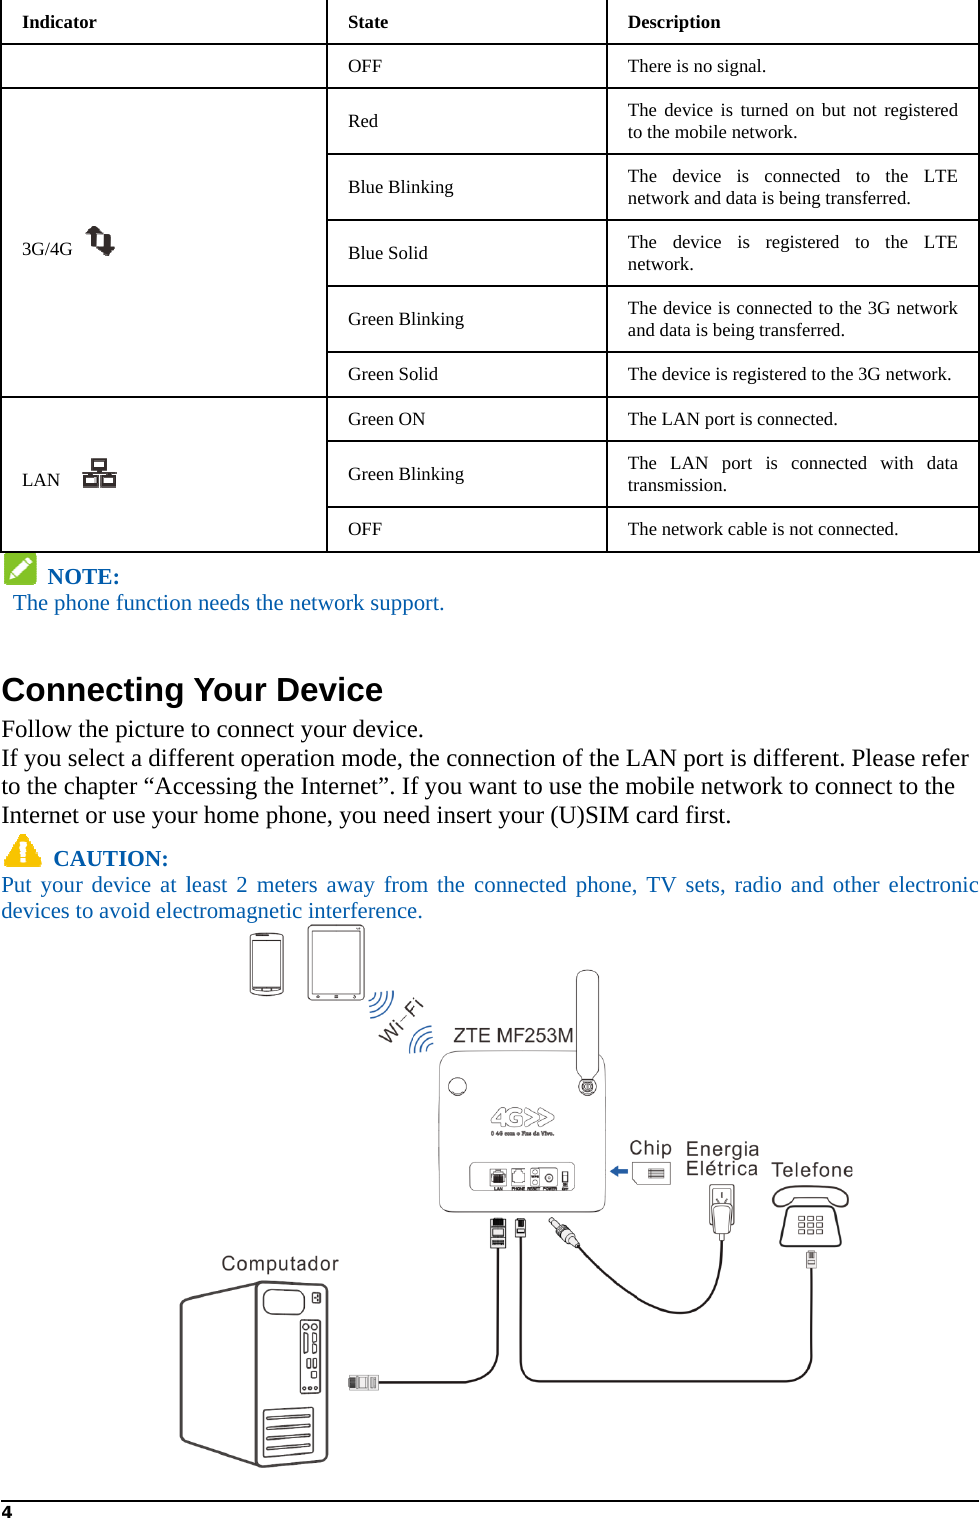 4  Indicat3G/4G LAN   NOThe ph ConnFollow If you sto the chInternet CAPut yourdevices ttor   OTE:  one functionnecting the picture elect a diffehapter “Acct or use youAUTION:  r device at lto avoid elecn needs the nYour Dto connect yerent operatcessing the ur home pholeast 2 metectromagneticState OFF Red Blue BlinBlue SolGreen BlGreen SoGreen ONGreen BlOFF etwork suppevice your devicetion mode, tInternet”. Ifone, you neers away fromc interferencenking id linking olid N linking ort. e.  the connectif you want ted insert youm the connee. DTTtoTnTnTanTTTtrTion of the Lto use the mur (U)SIM cected phone,Description There is no signaThe device is tuo the mobile neThe device isnetwork and datThe device isnetwork. The device is cond data is beingThe device is regThe LAN port isThe LAN portransmission. The network cabLAN port is mobile netwcard first.  TV sets, raal. urned on but ntwork.  connected ta is being transs registered tonnected to theg transferred. gistered to the 3s connected. t is connectedble is not connedifferent. Pwork to connadio and oth not registered o the LTE sferred. o the LTE e 3G network 3G network. d with data ected. Please refer nect to the her electronicc 